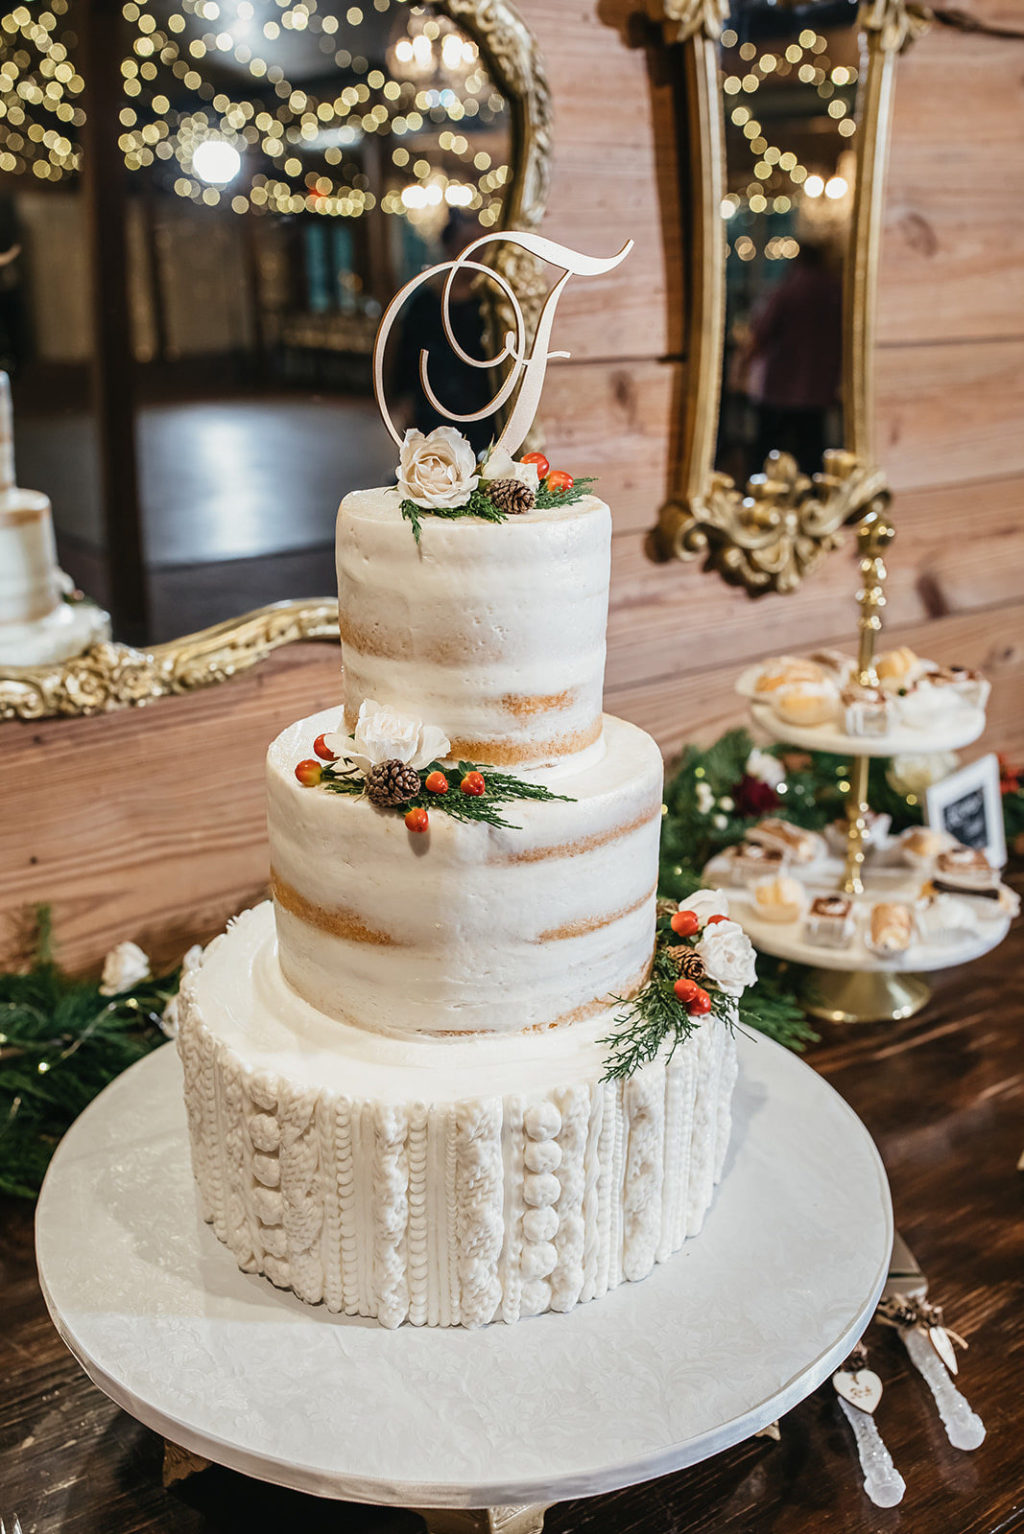 Rustic Country Wedding Dessert Barrel Wood Table with Semi Naked Cake Buttercream Knit Gold Monogram | Tampa Wedding Cakes and Desserts by Alessi Bakeries